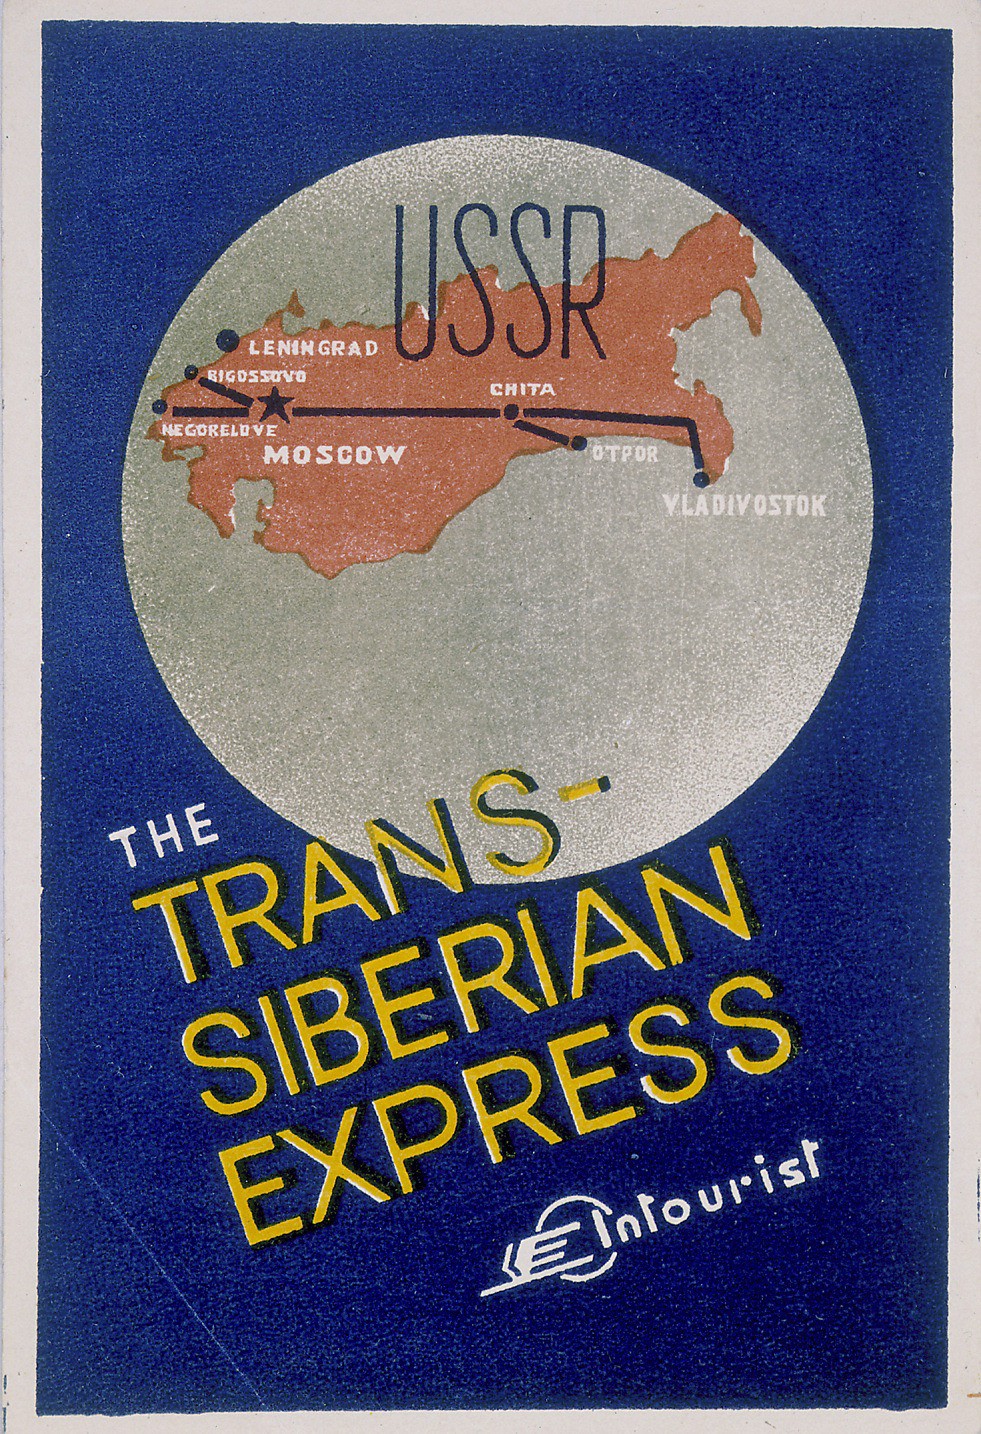 Suitcase label for Trans-Siberian Express [LCID: 2000si34]